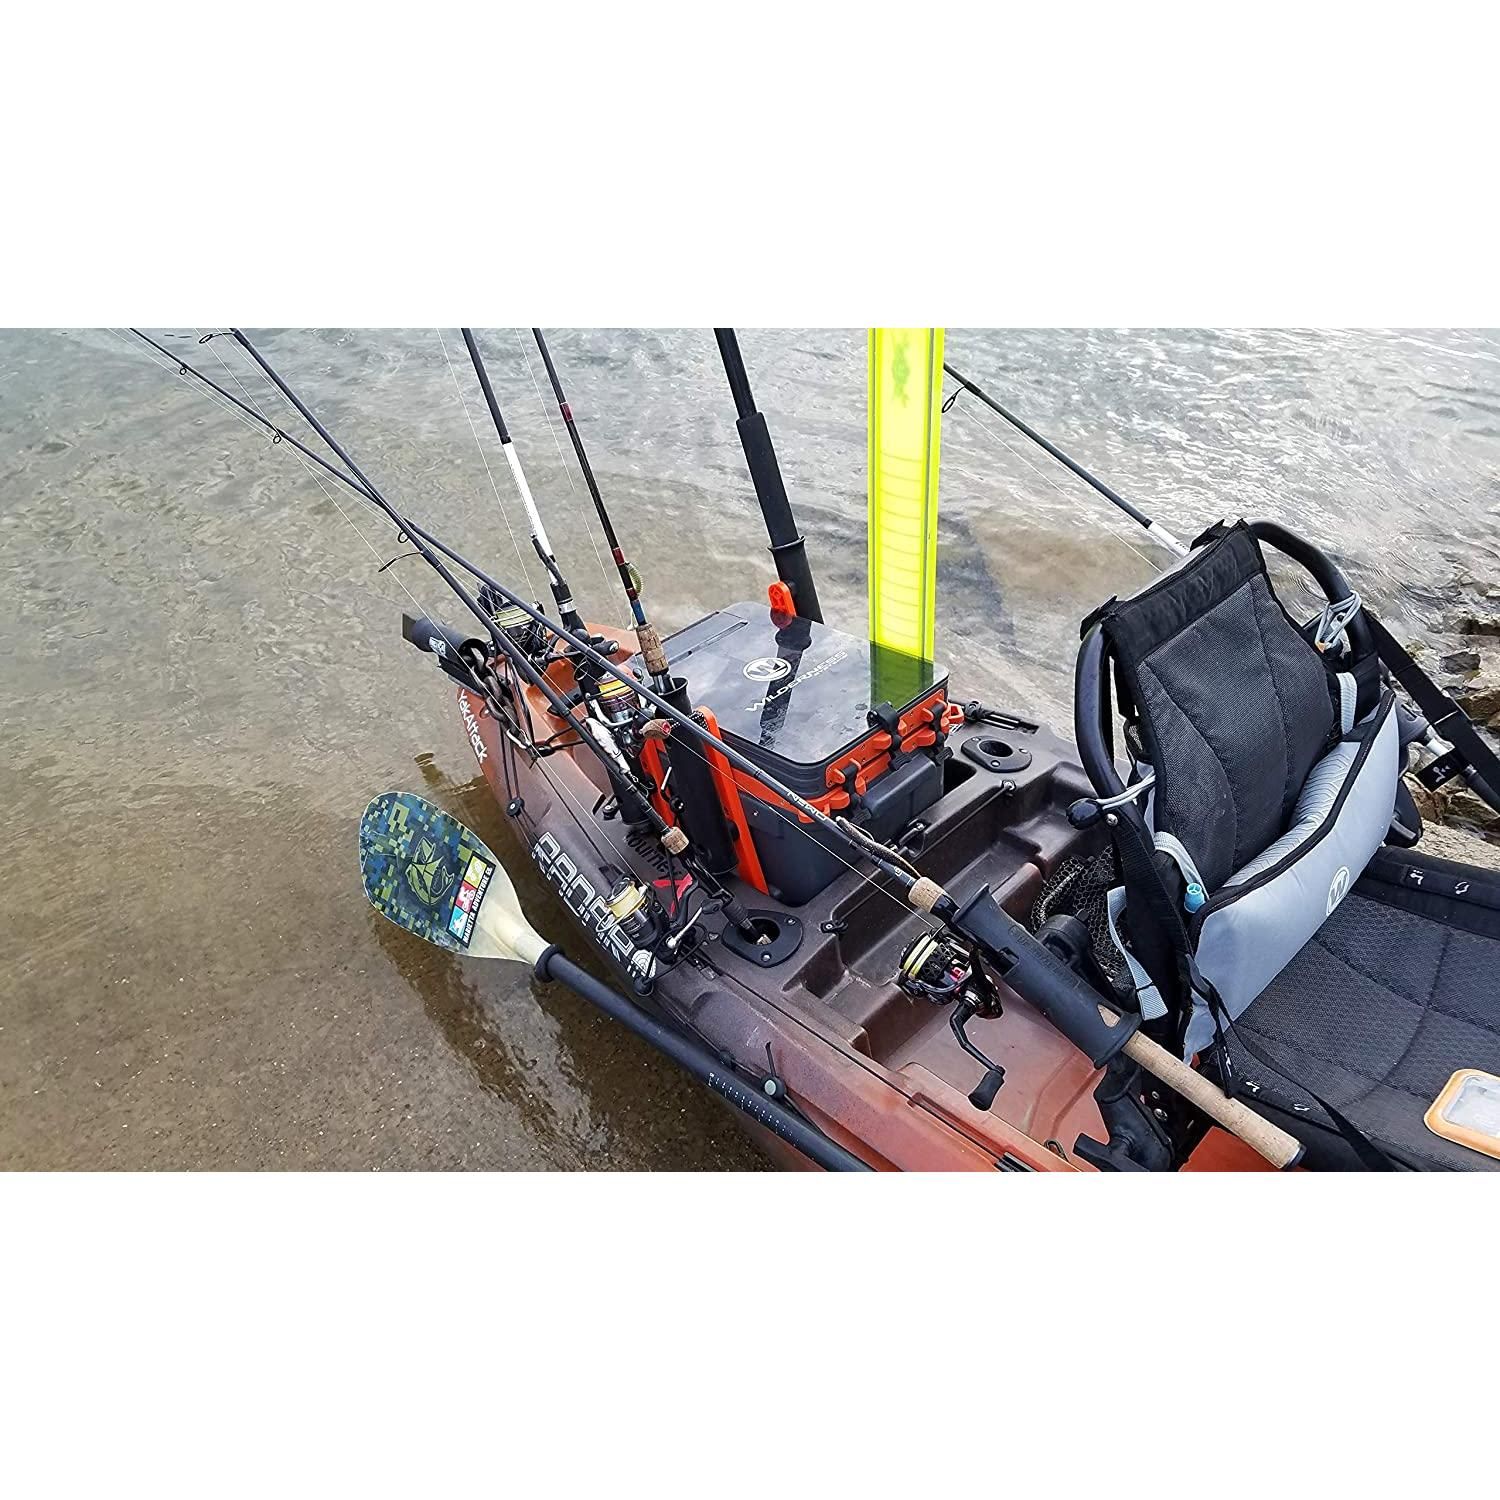 Wilderness Systems Kayak Crate, 4 Rod Holders